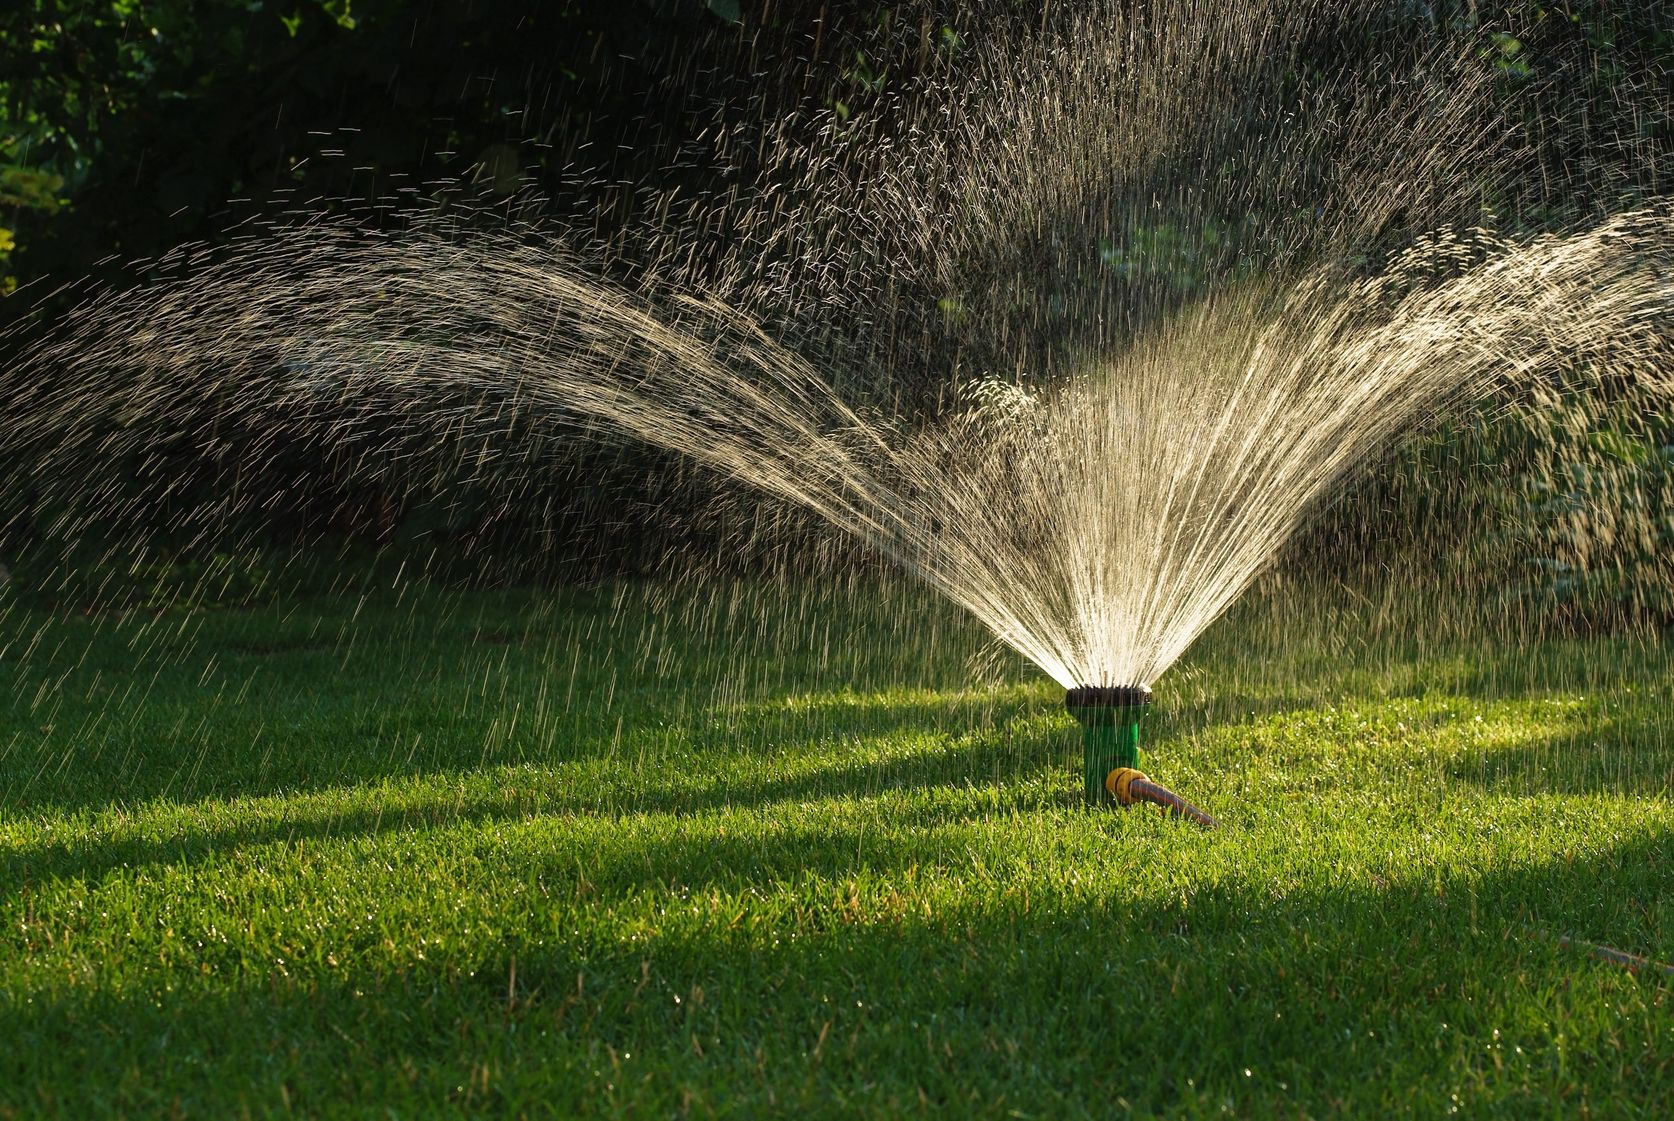 Sprinker on the lawn, spraying up water